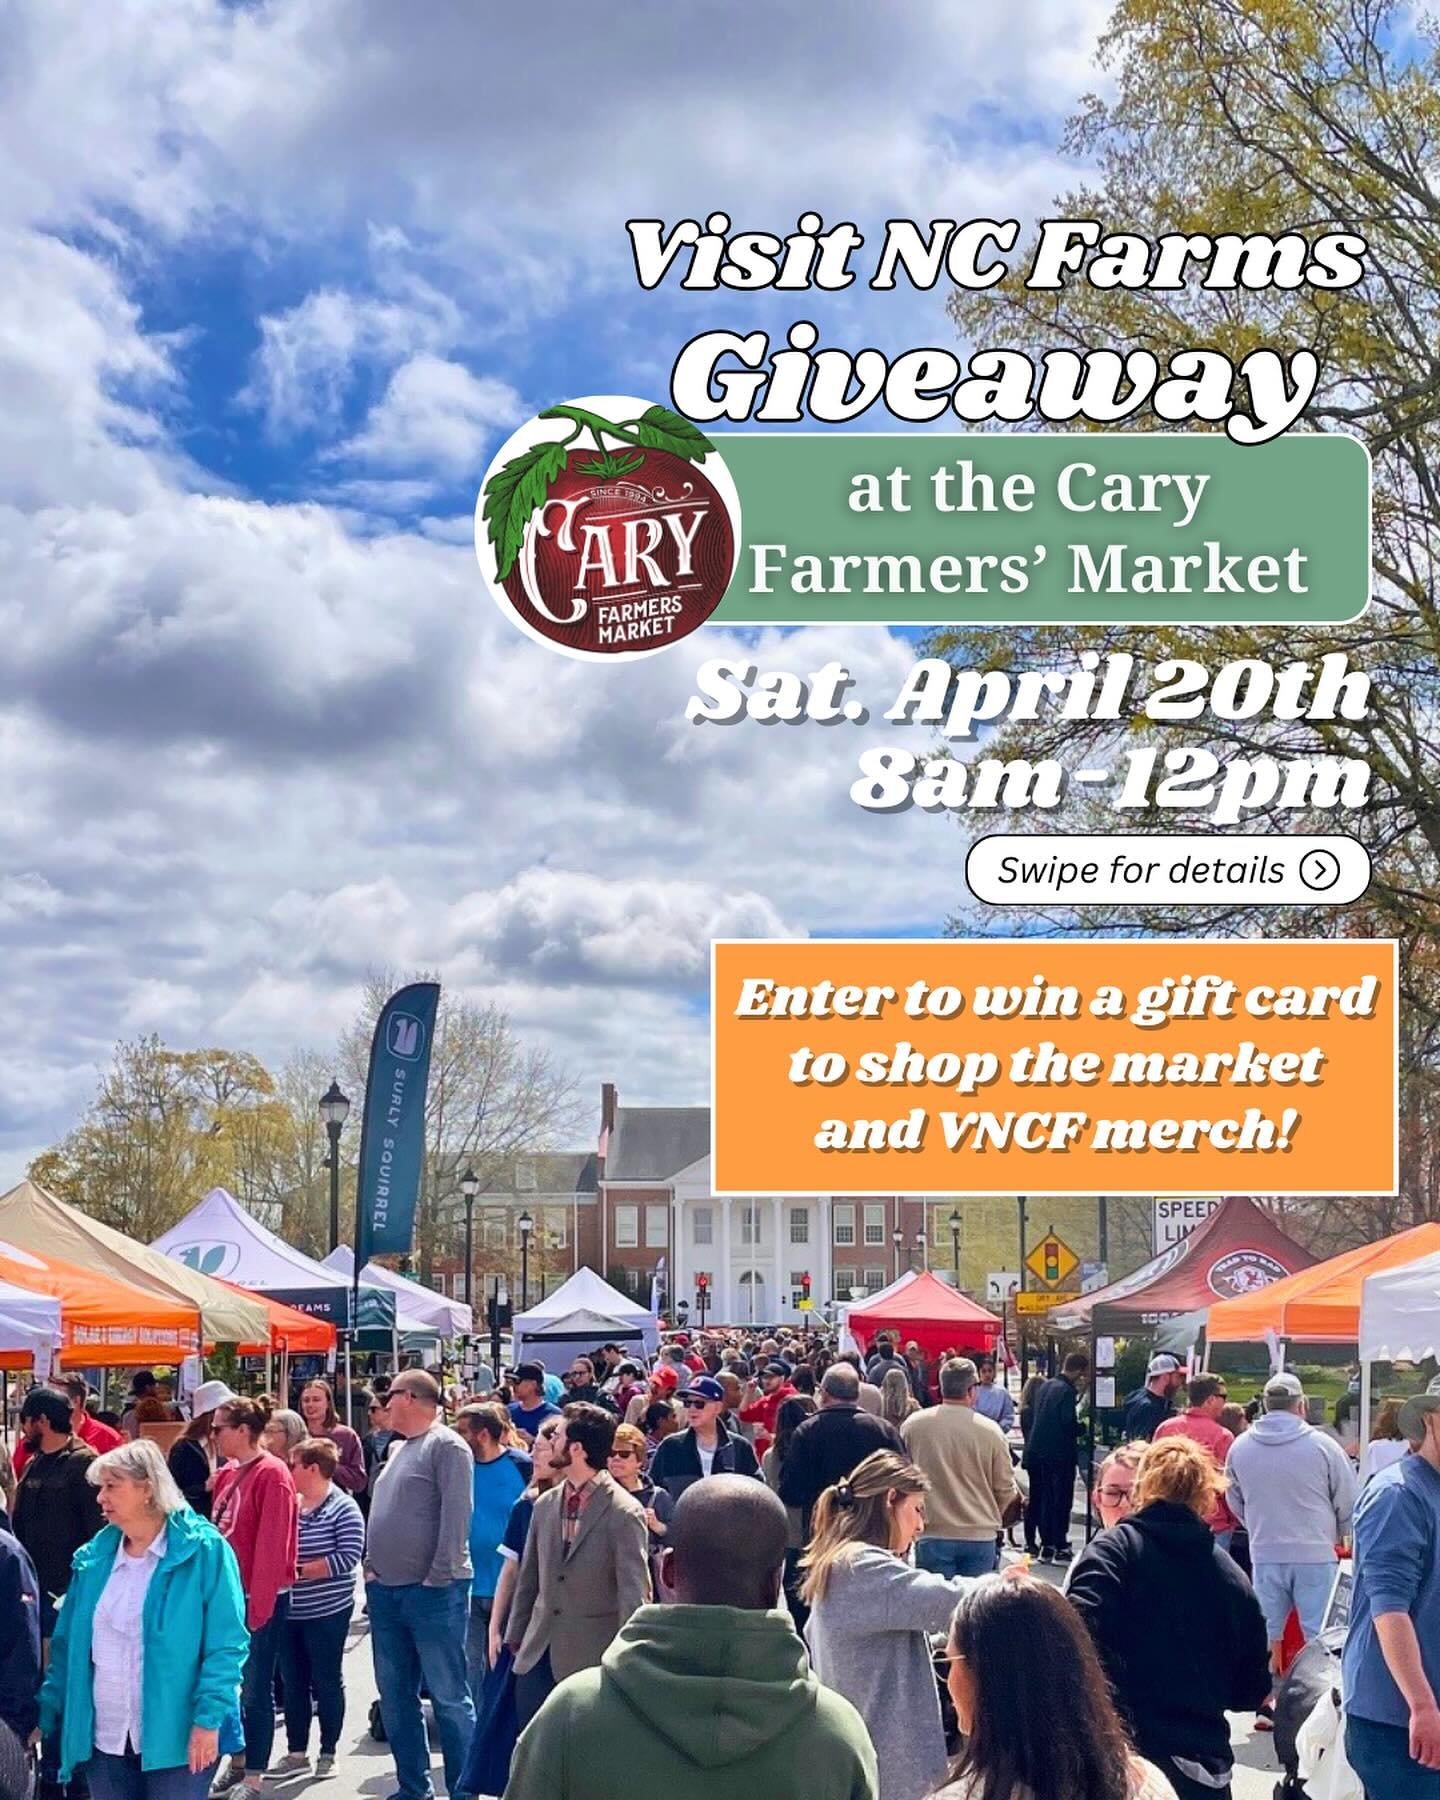 Next stop, Wake County! 🎊Our Farmers&rsquo; Market Giveaway is headed to the @caryfarmersmkt on Saturday, April 20th and we&rsquo;re choosing ONE lucky winner to shop the market on us and take home some awesome VNCF merch.☀️

Here&rsquo;s how you 🫵